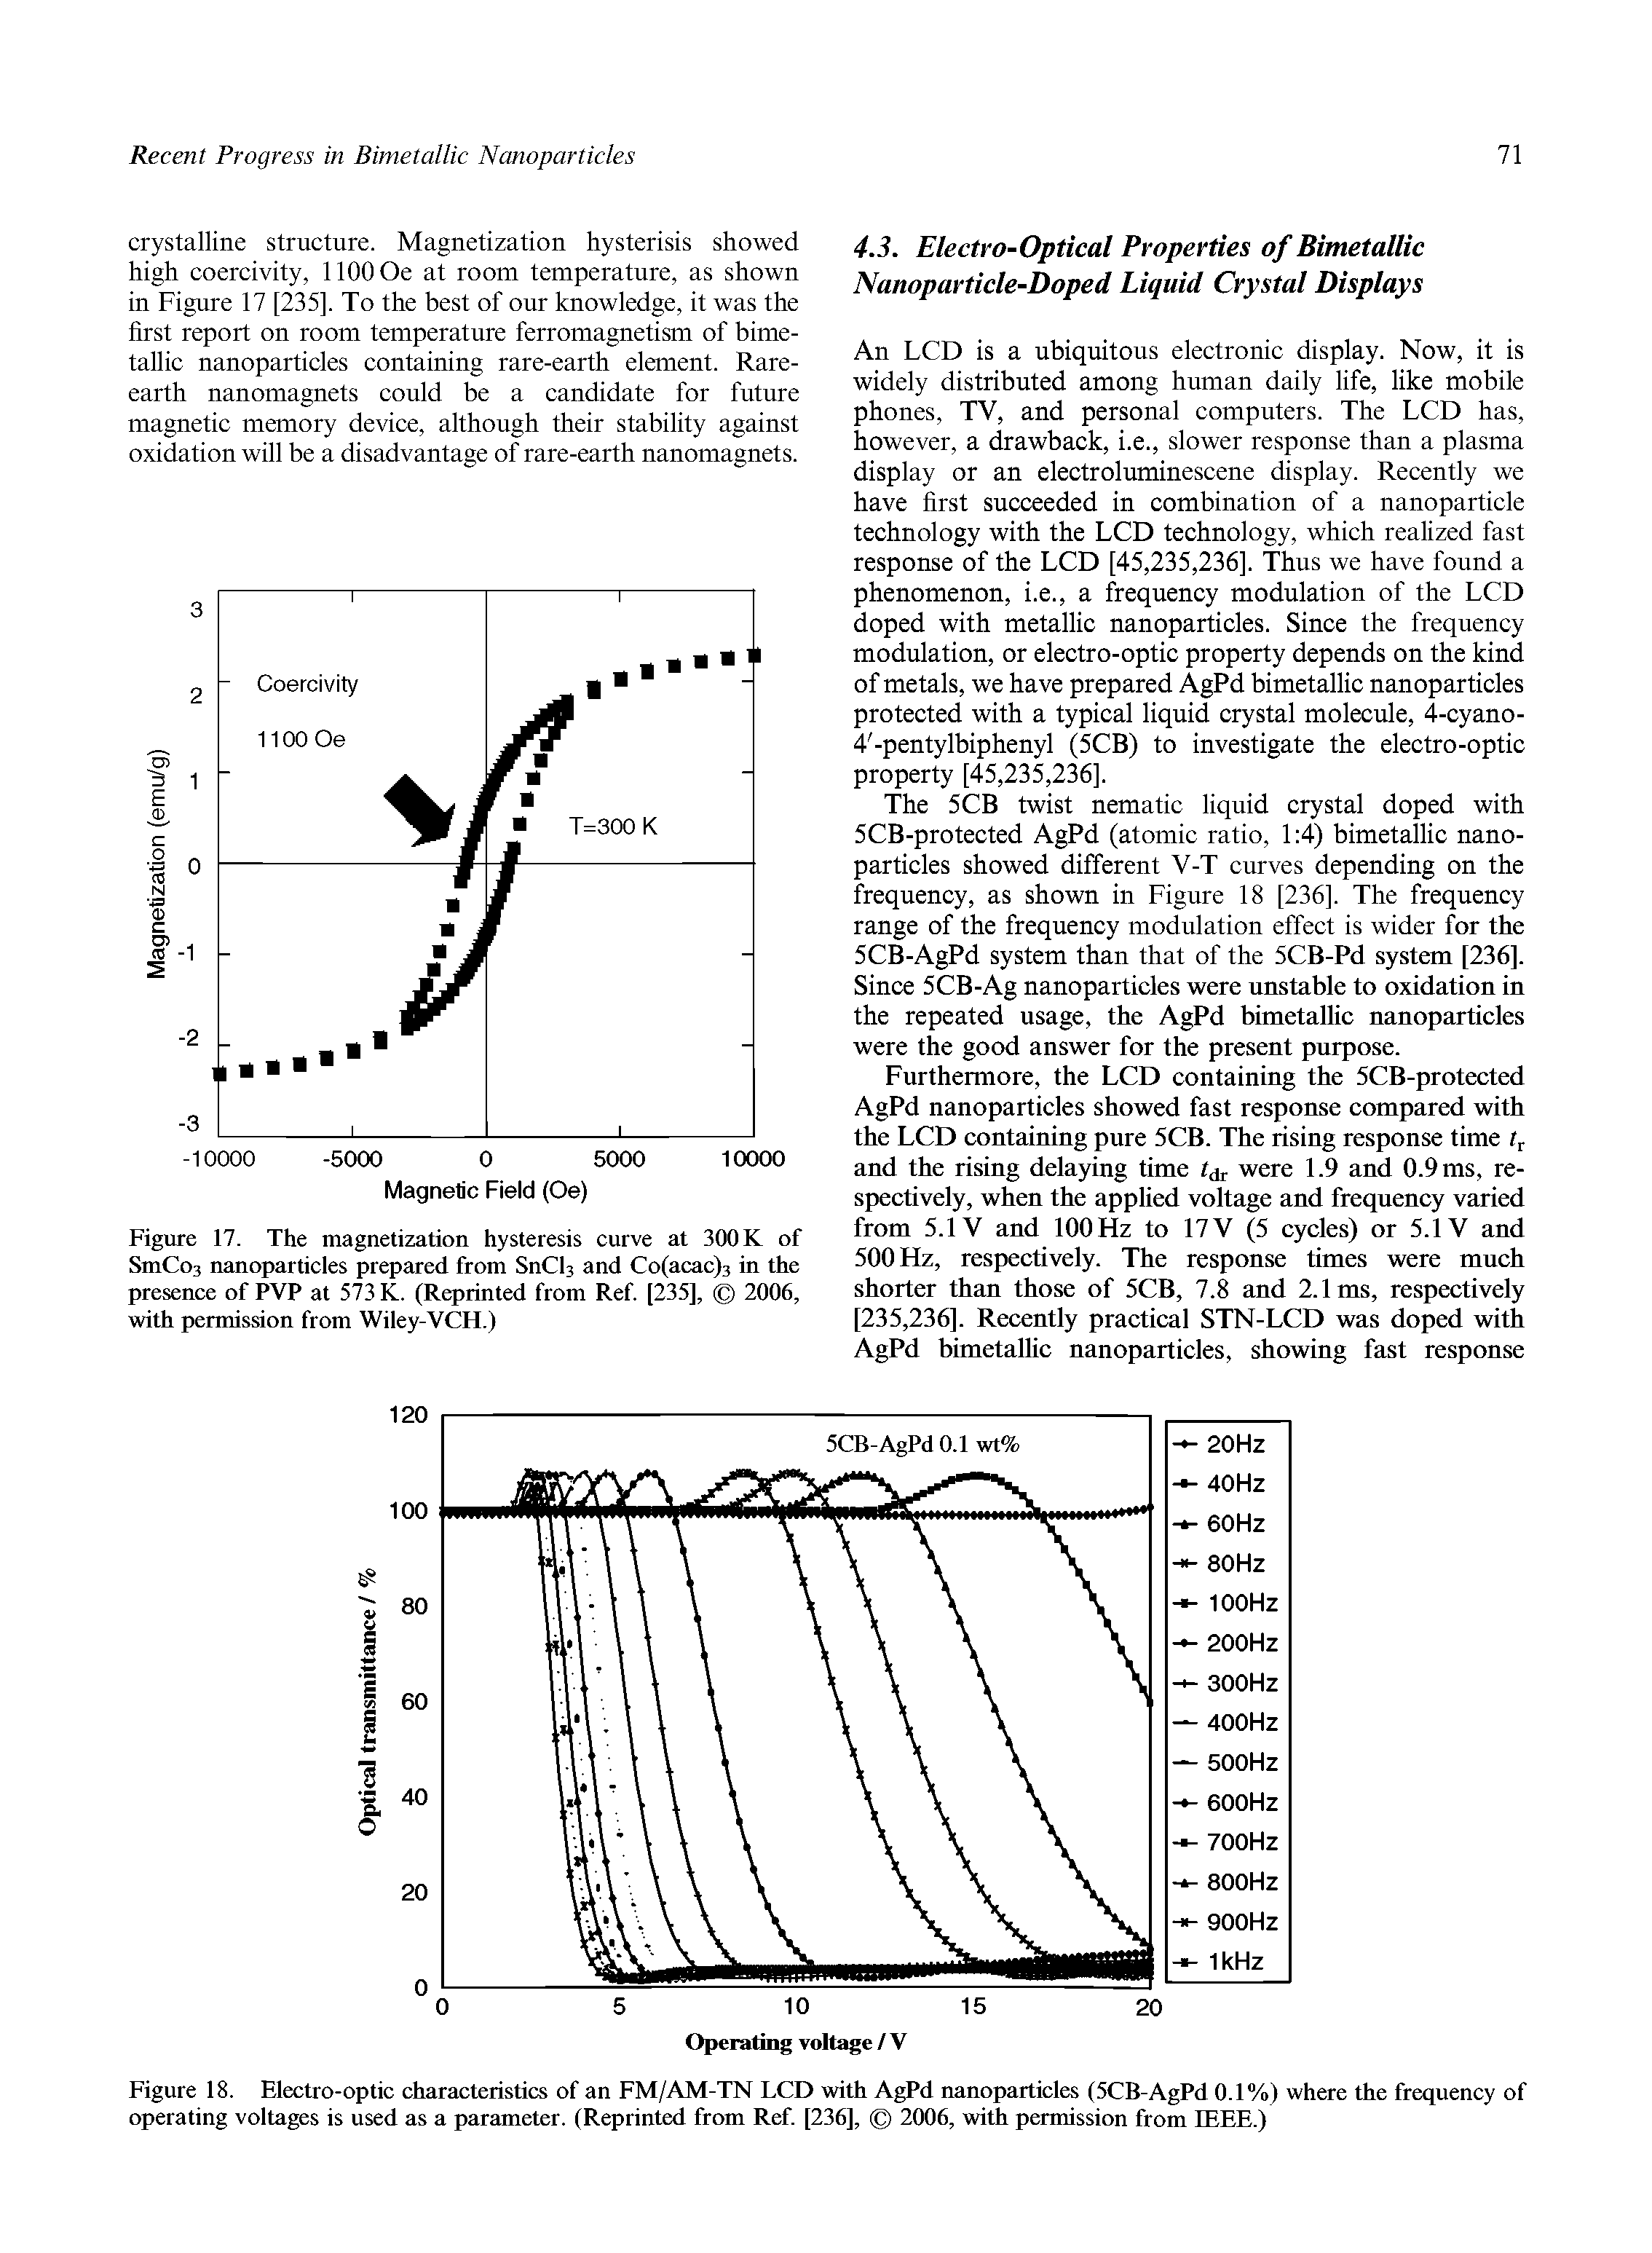 Figure 18. Electro-optic characteristics of an FM/AM-TN LCD with AgPd nanoparticles (5CB-AgPd 0.1%) where the frequency of operating voltages is used as a parameter. (Reprinted from Ref [236], 2006, with permission from IEEE.)...